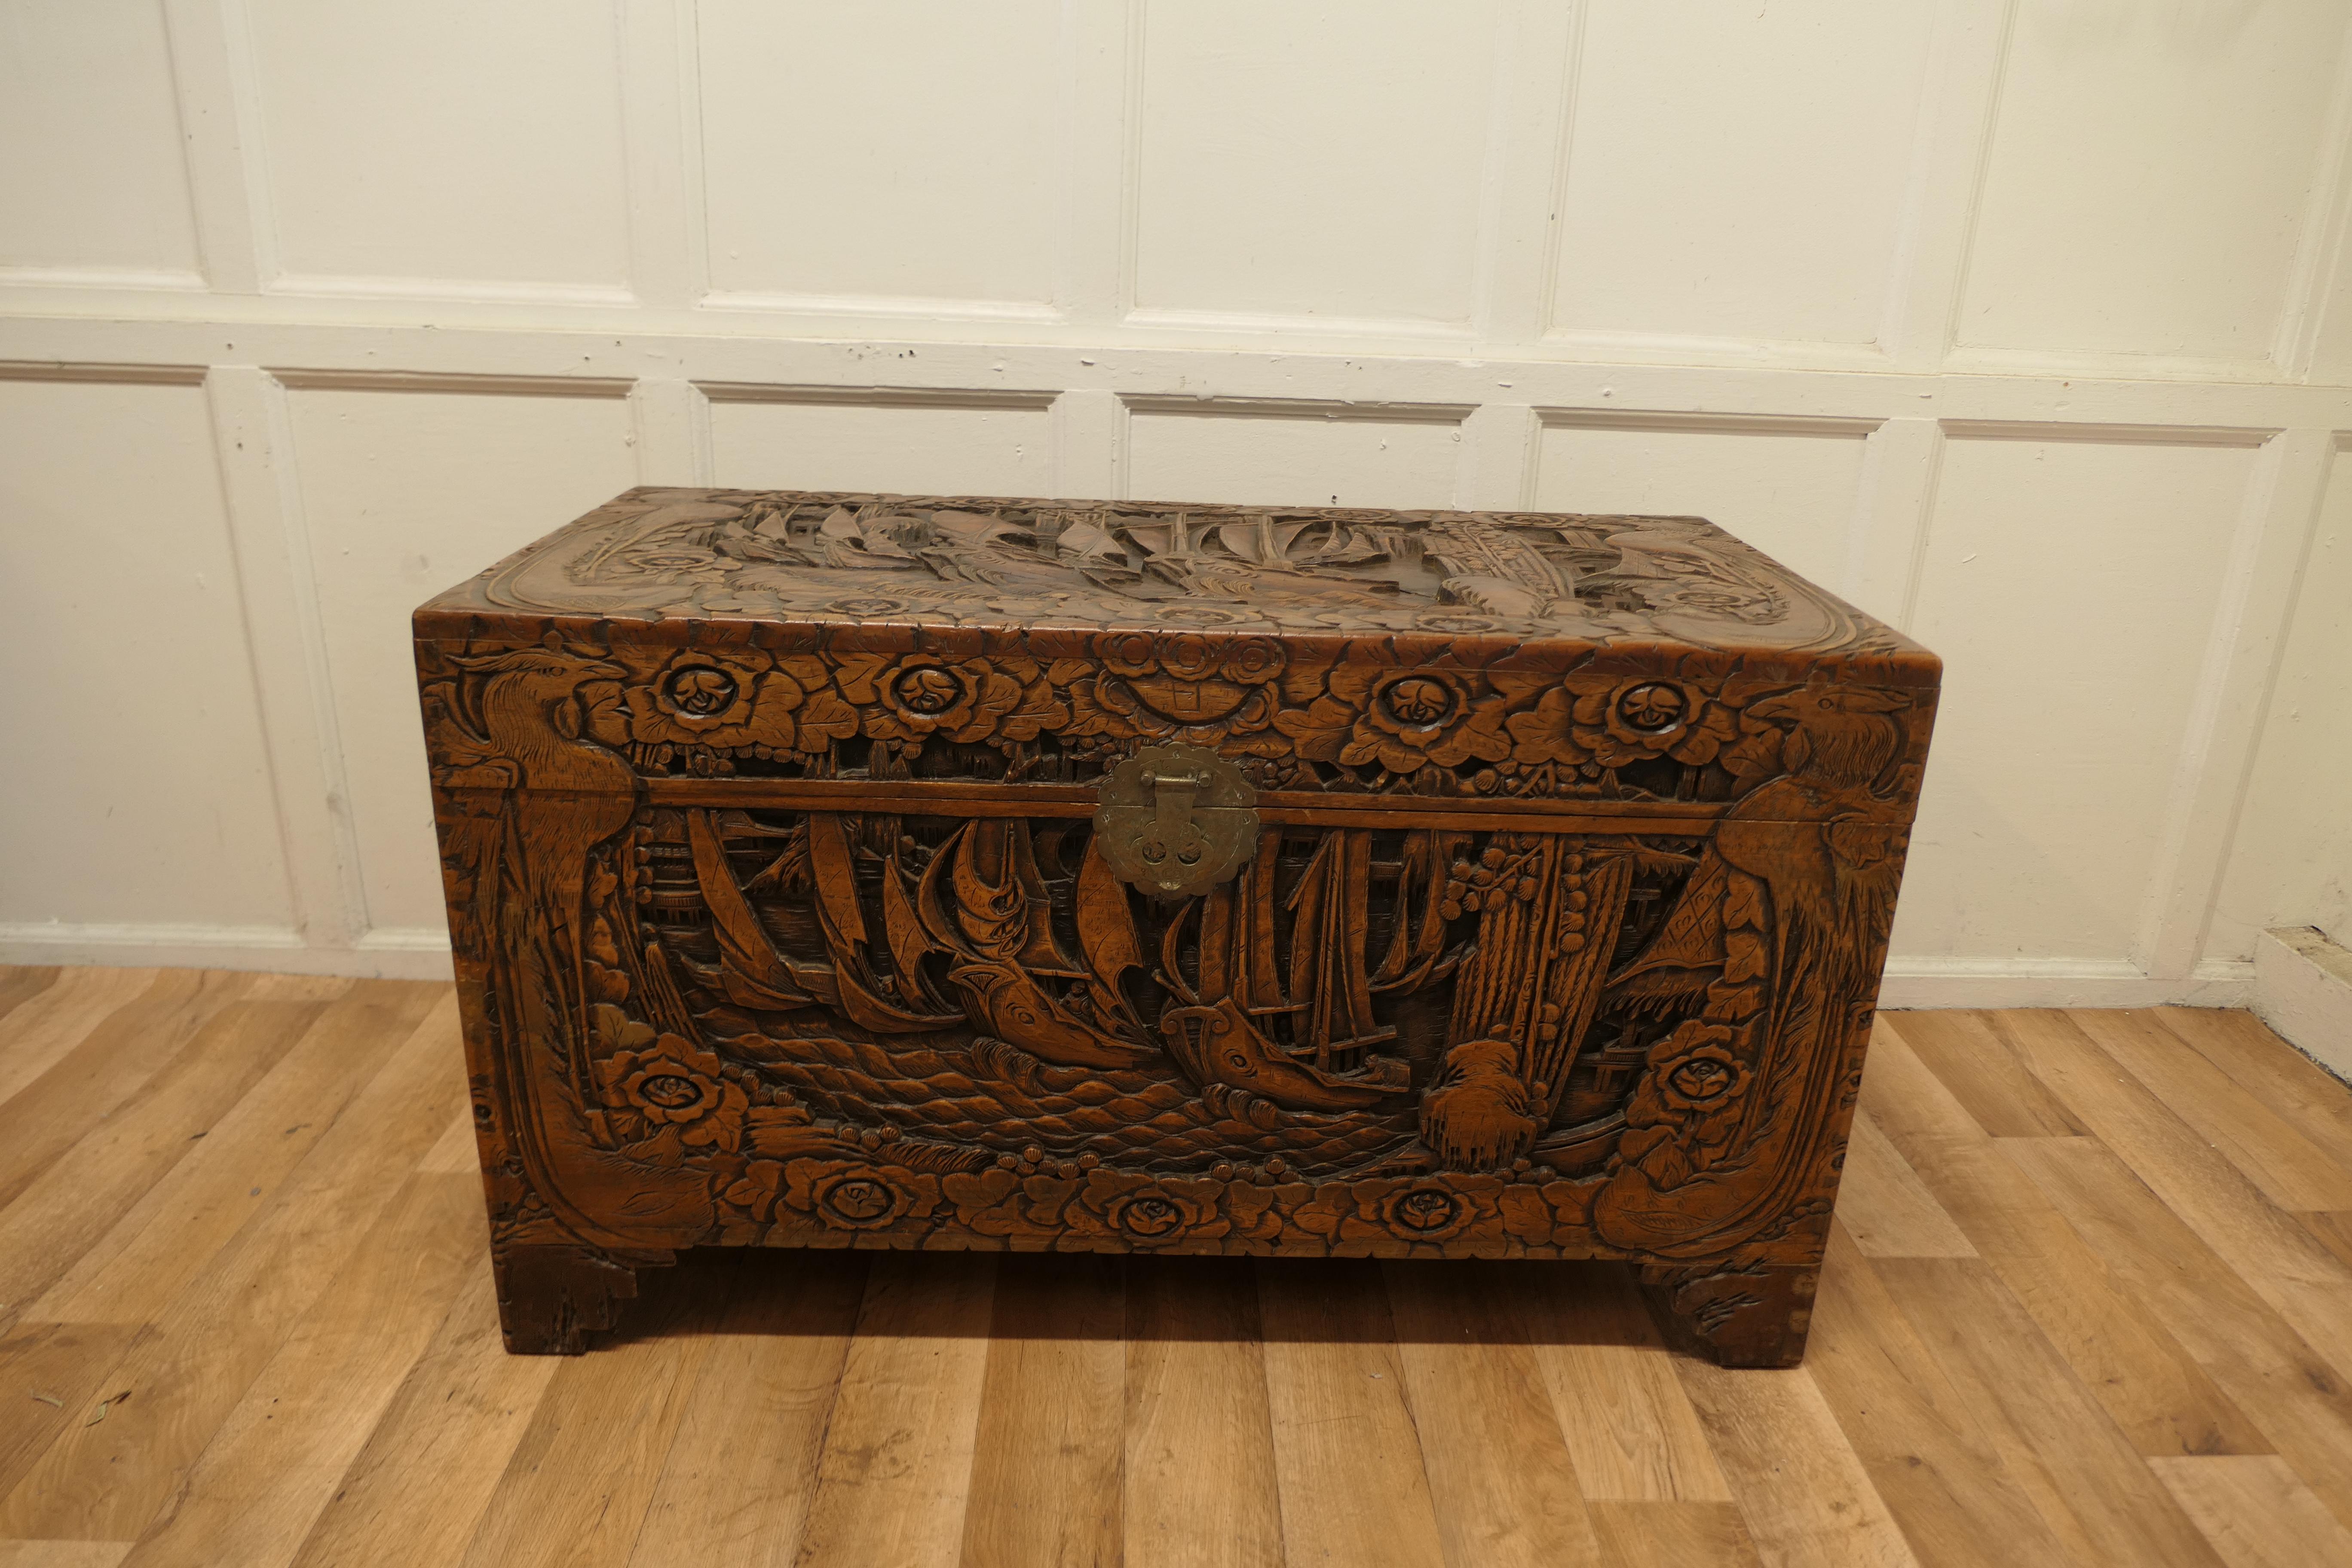 Large Oriental Carved camphor wood chest

This Beautiful Carved Chest is made from Camphor Wood, for those of you who do not know camphor wood it looks a lot like Mahogany it is a hard wood which lends itself very well to carving.

However the